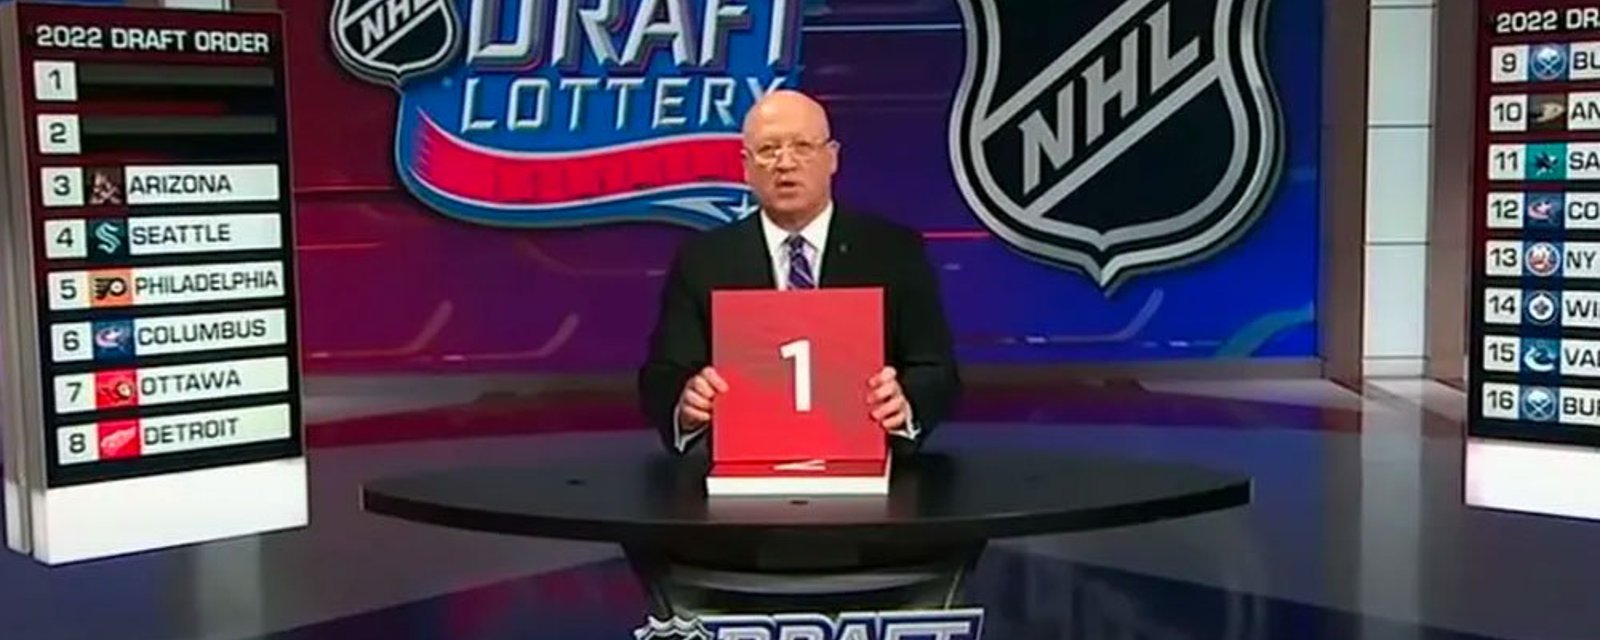 The Draft lottery results are in!